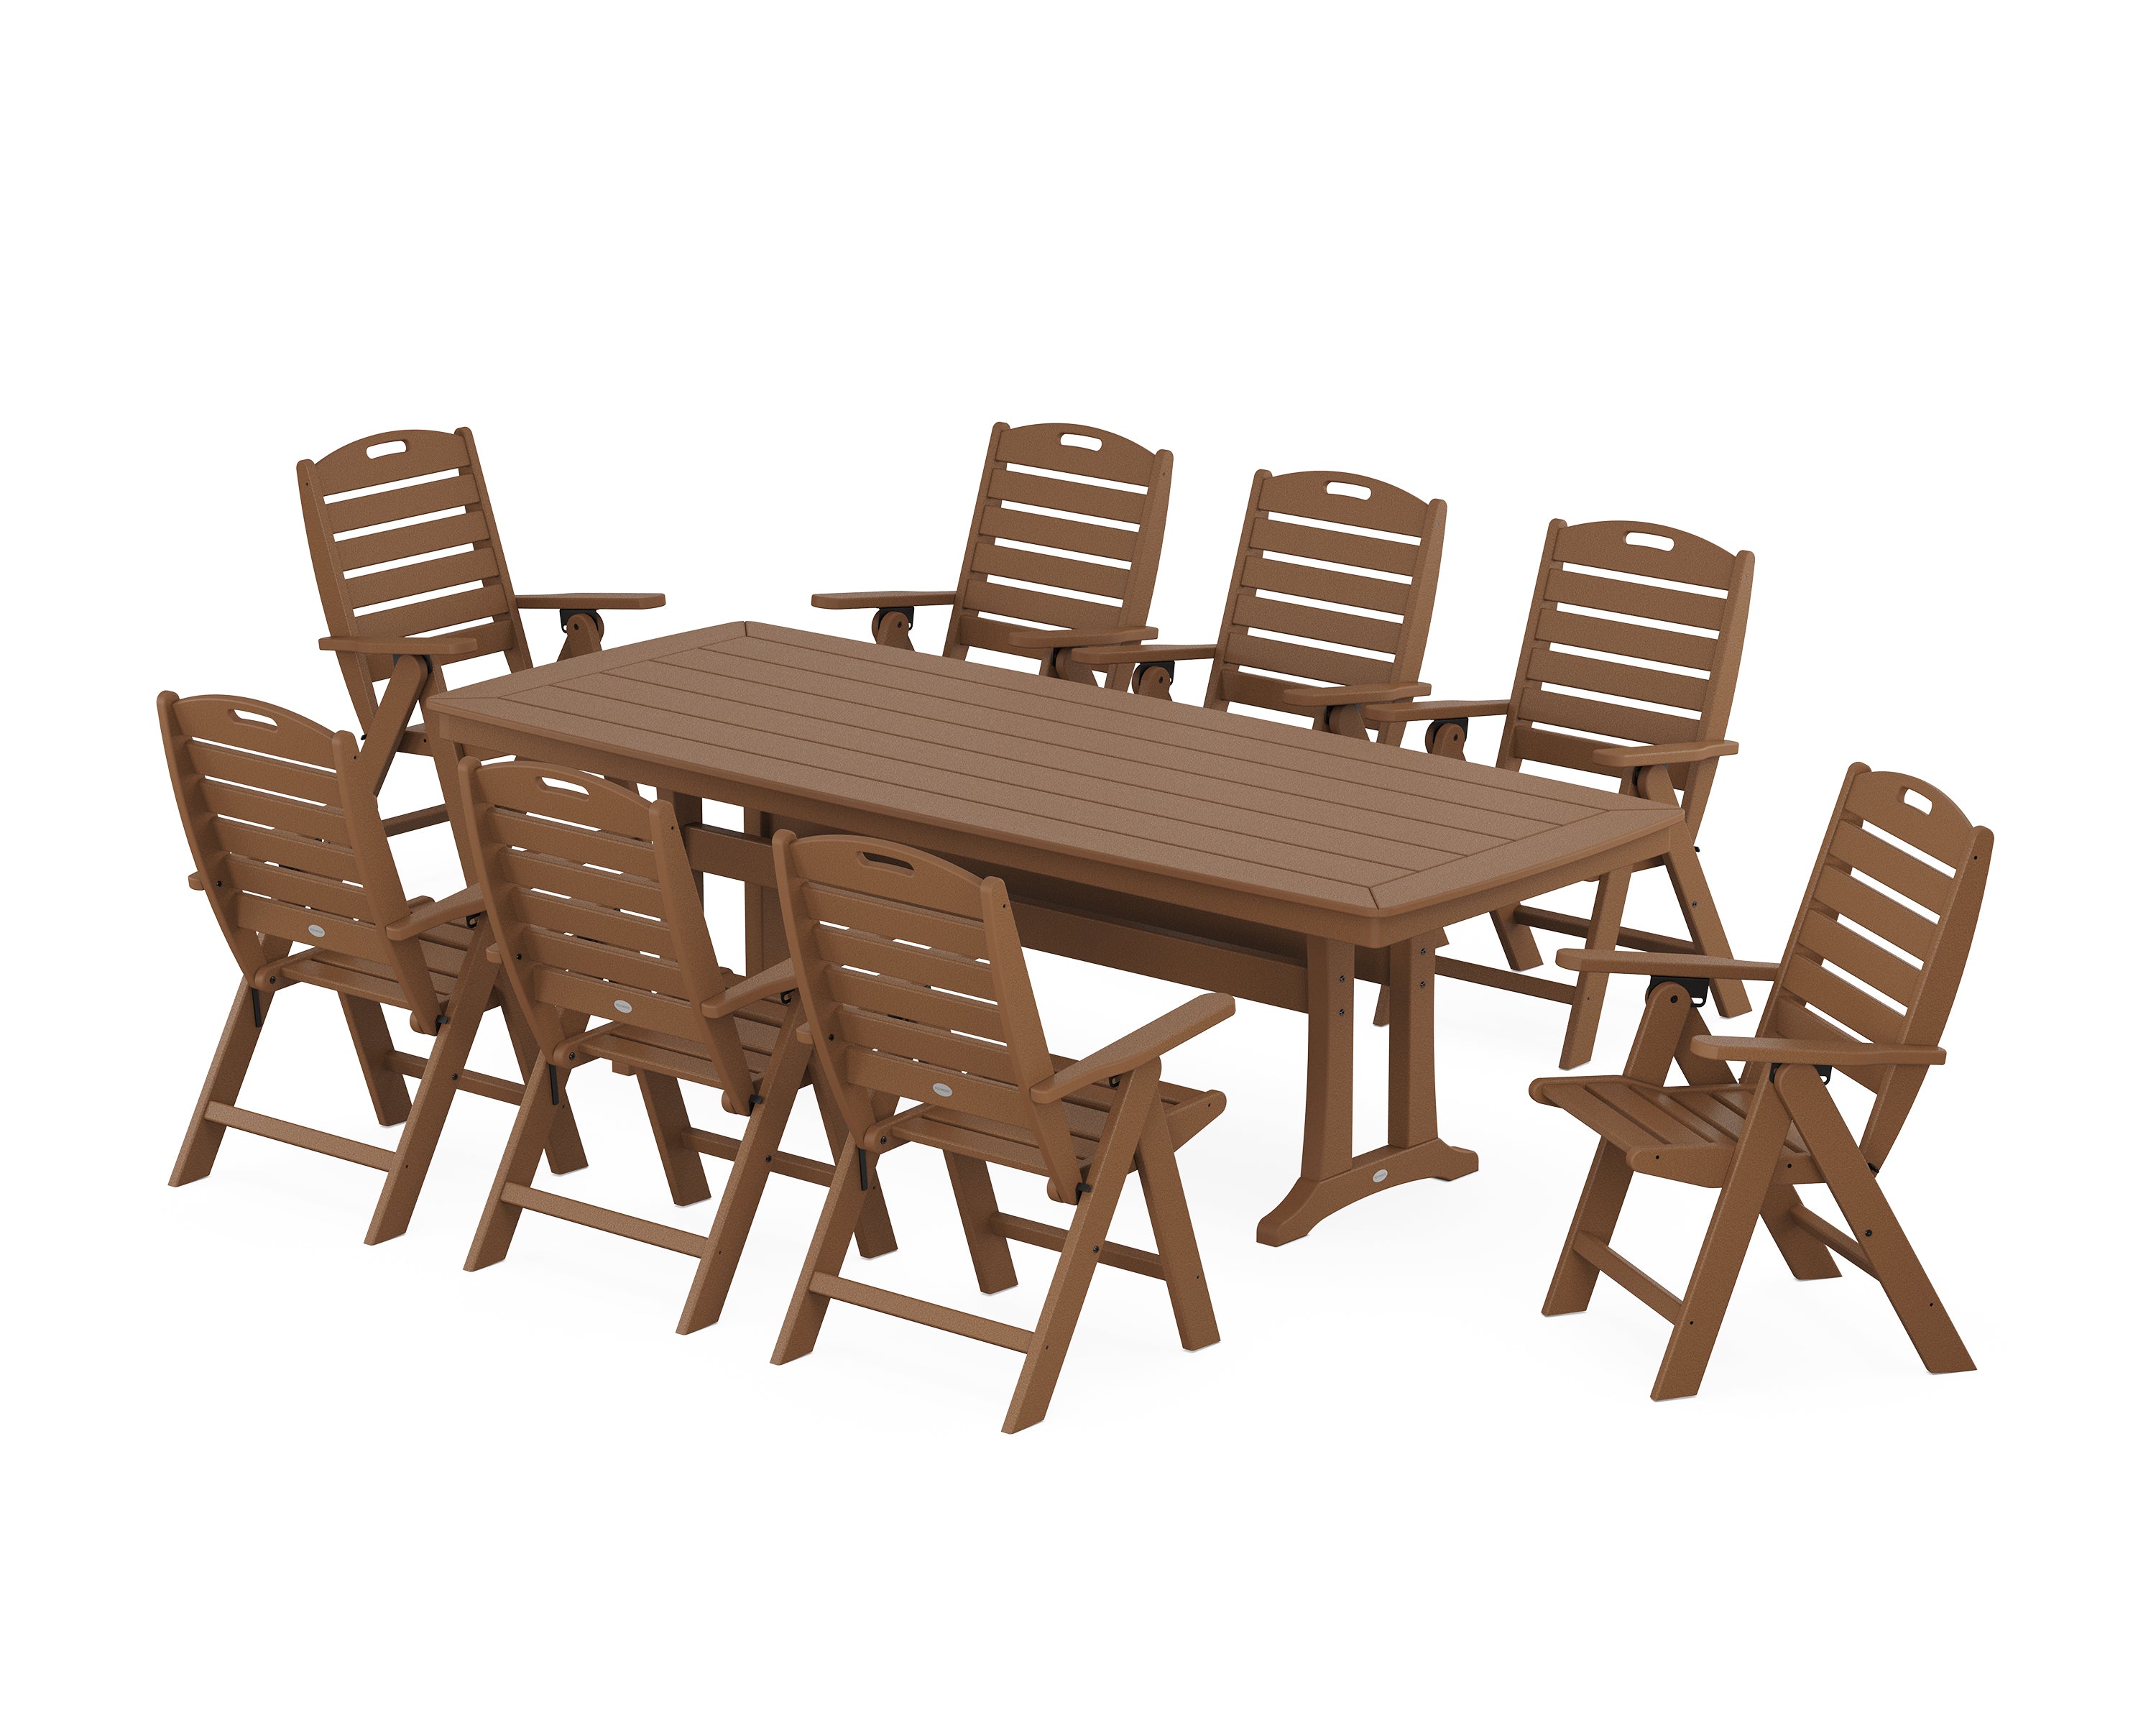 POLYWOOD® Nautical Highback 9-Piece Dining Set with Trestle Legs in Teak